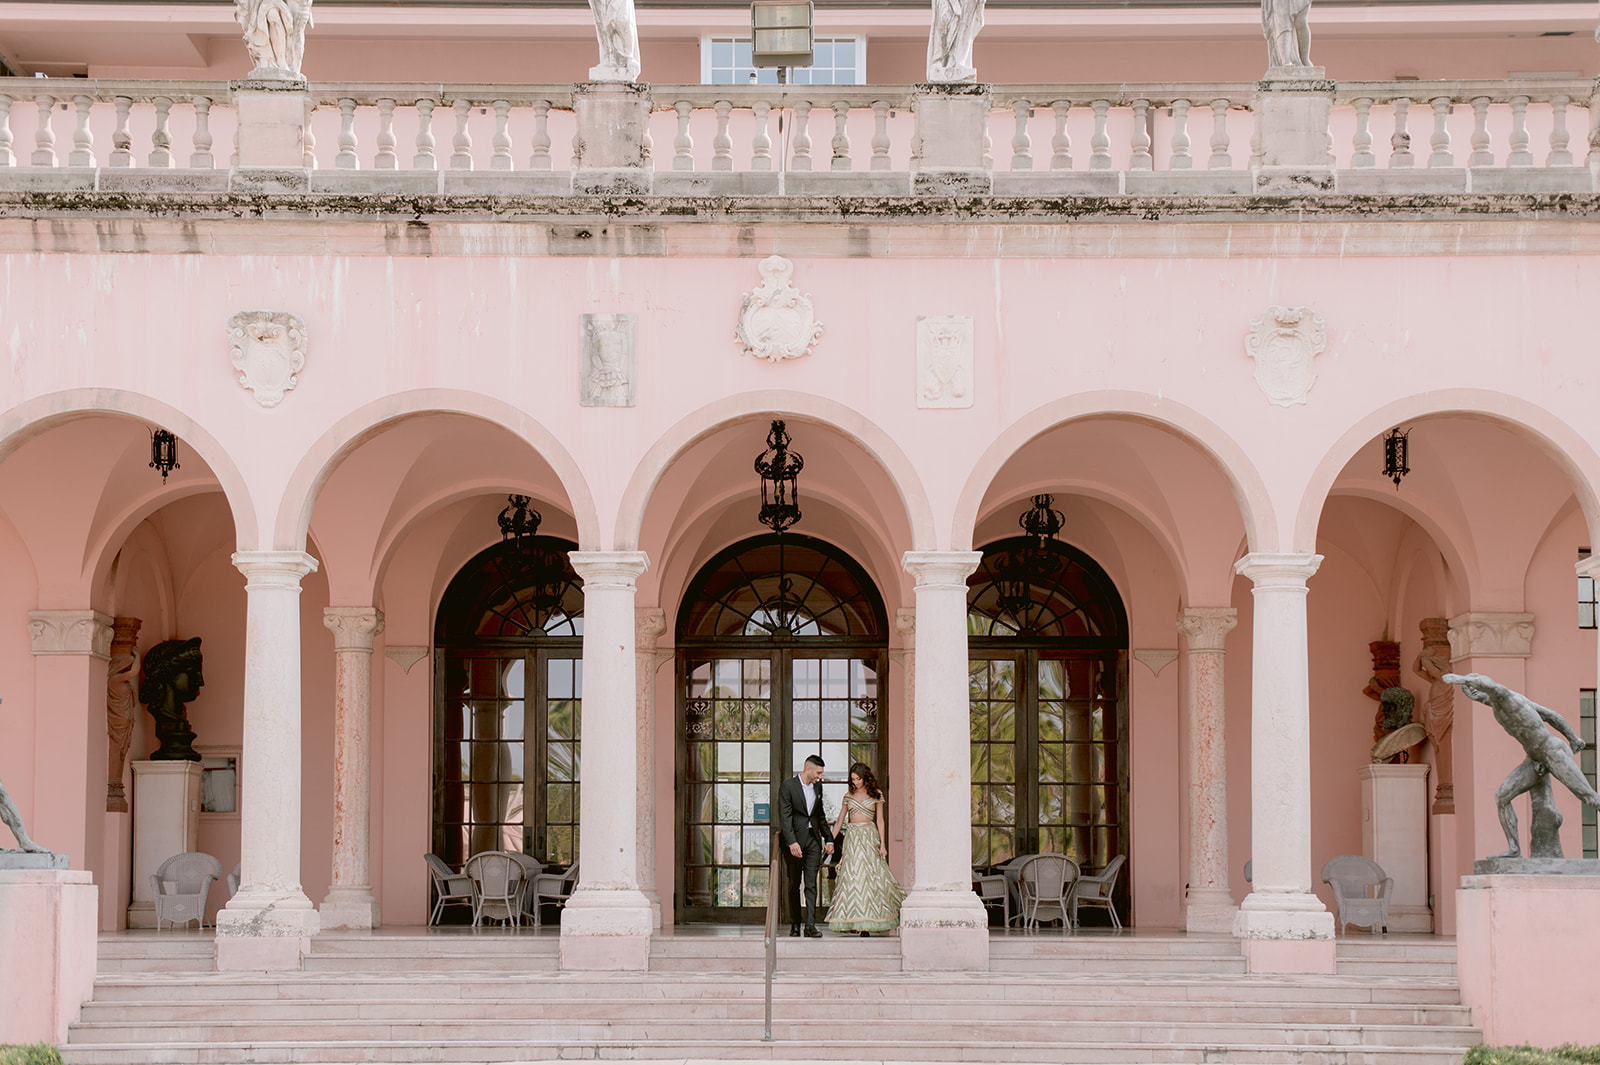 "Ca' d'Zan as a romantic backdrop for this Ringling Museum engagement session"
